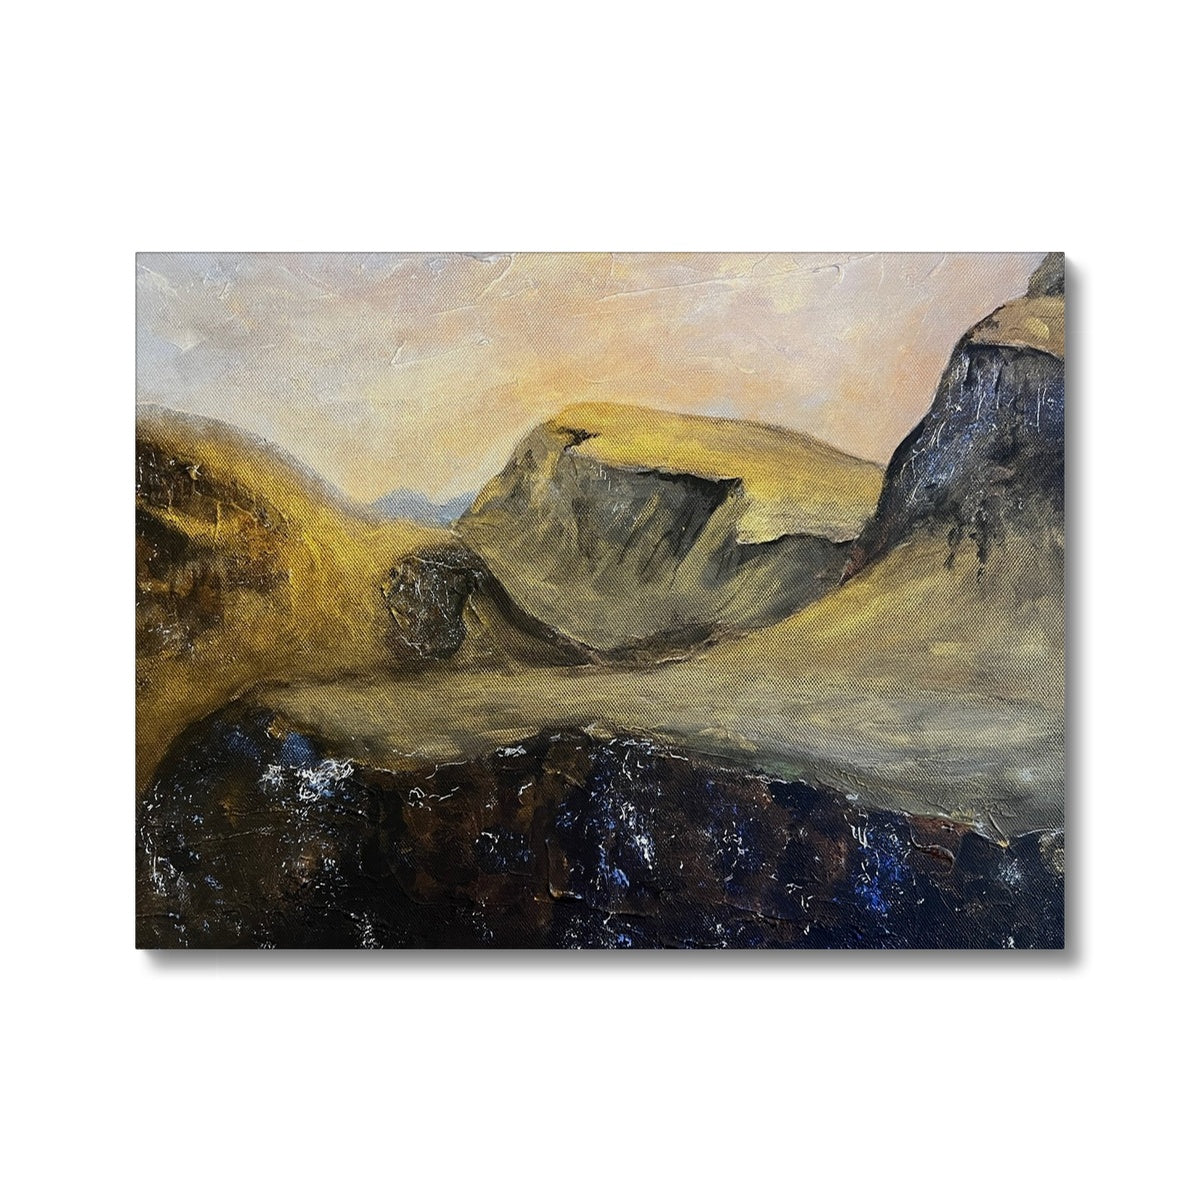 The Quiraing Skye Painting | Canvas From Scotland-Contemporary Stretched Canvas Prints-Skye Art Gallery-24"x18"-Paintings, Prints, Homeware, Art Gifts From Scotland By Scottish Artist Kevin Hunter